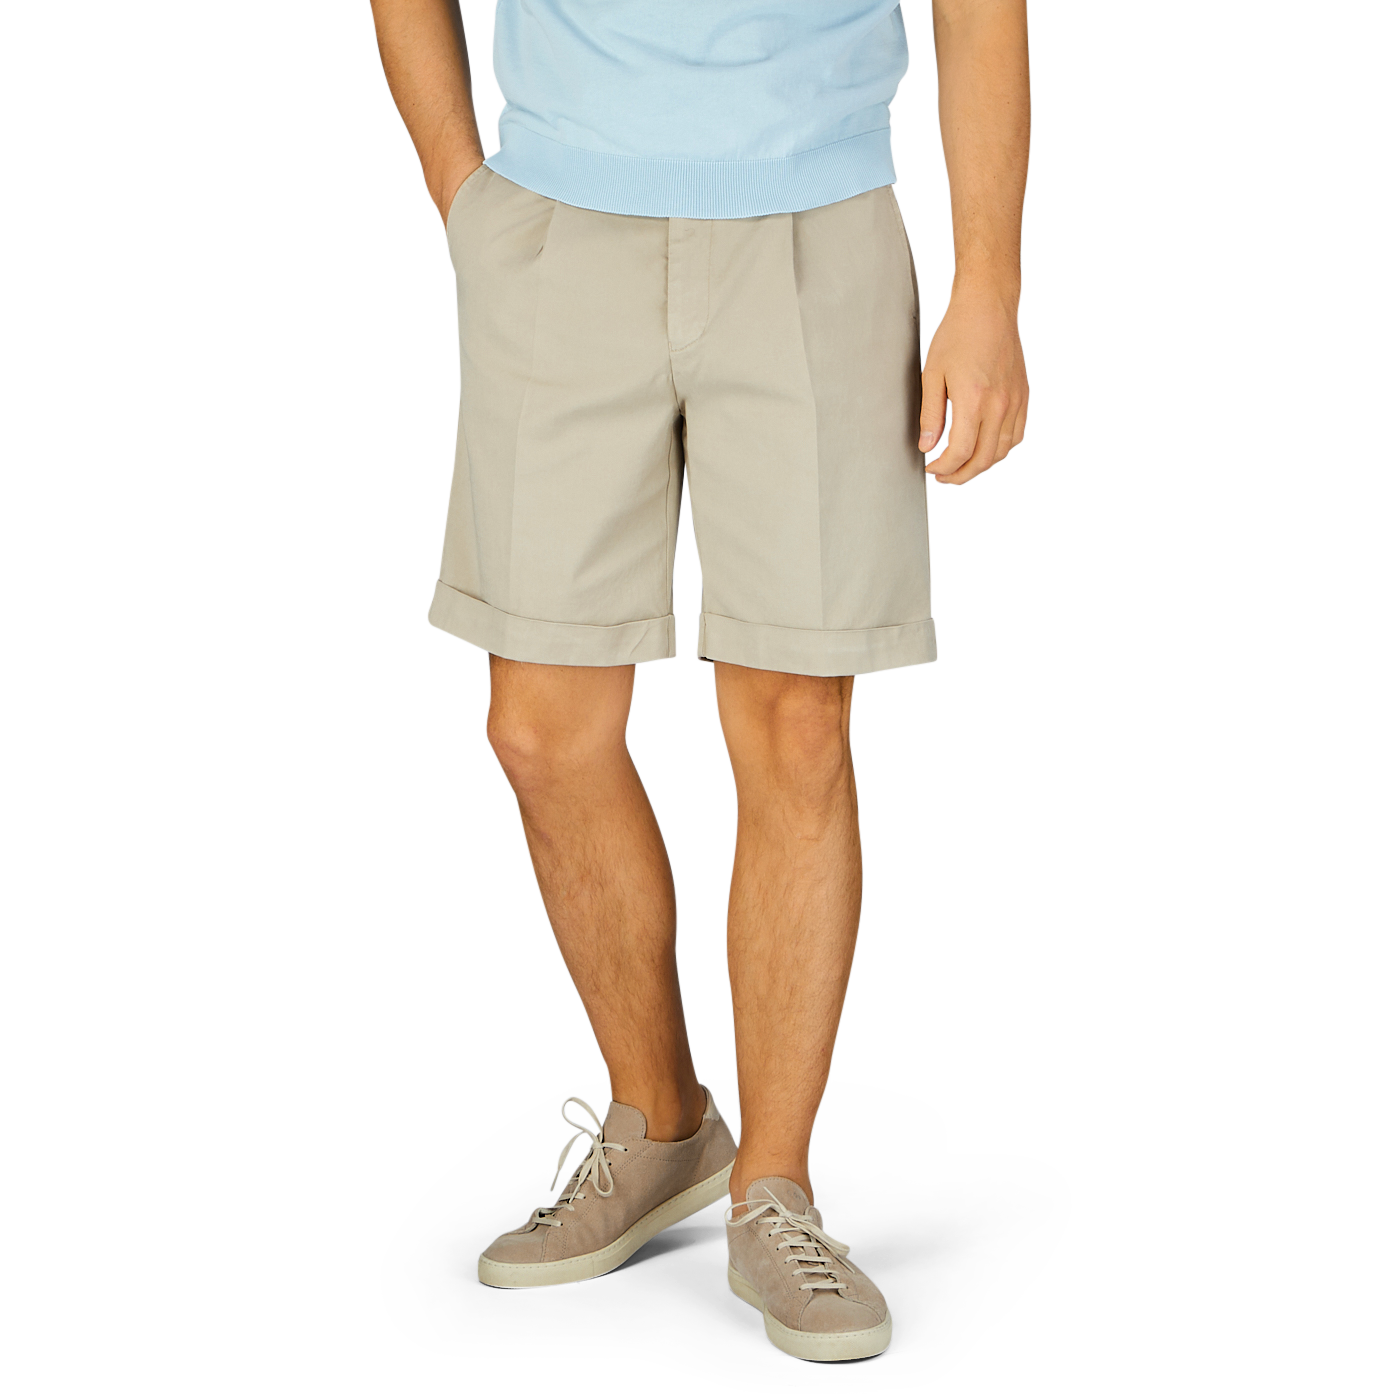 A person wearing Berwich Sabbia Beige Cotton Blend Pleated Shorts and casual shoes against a blue background.